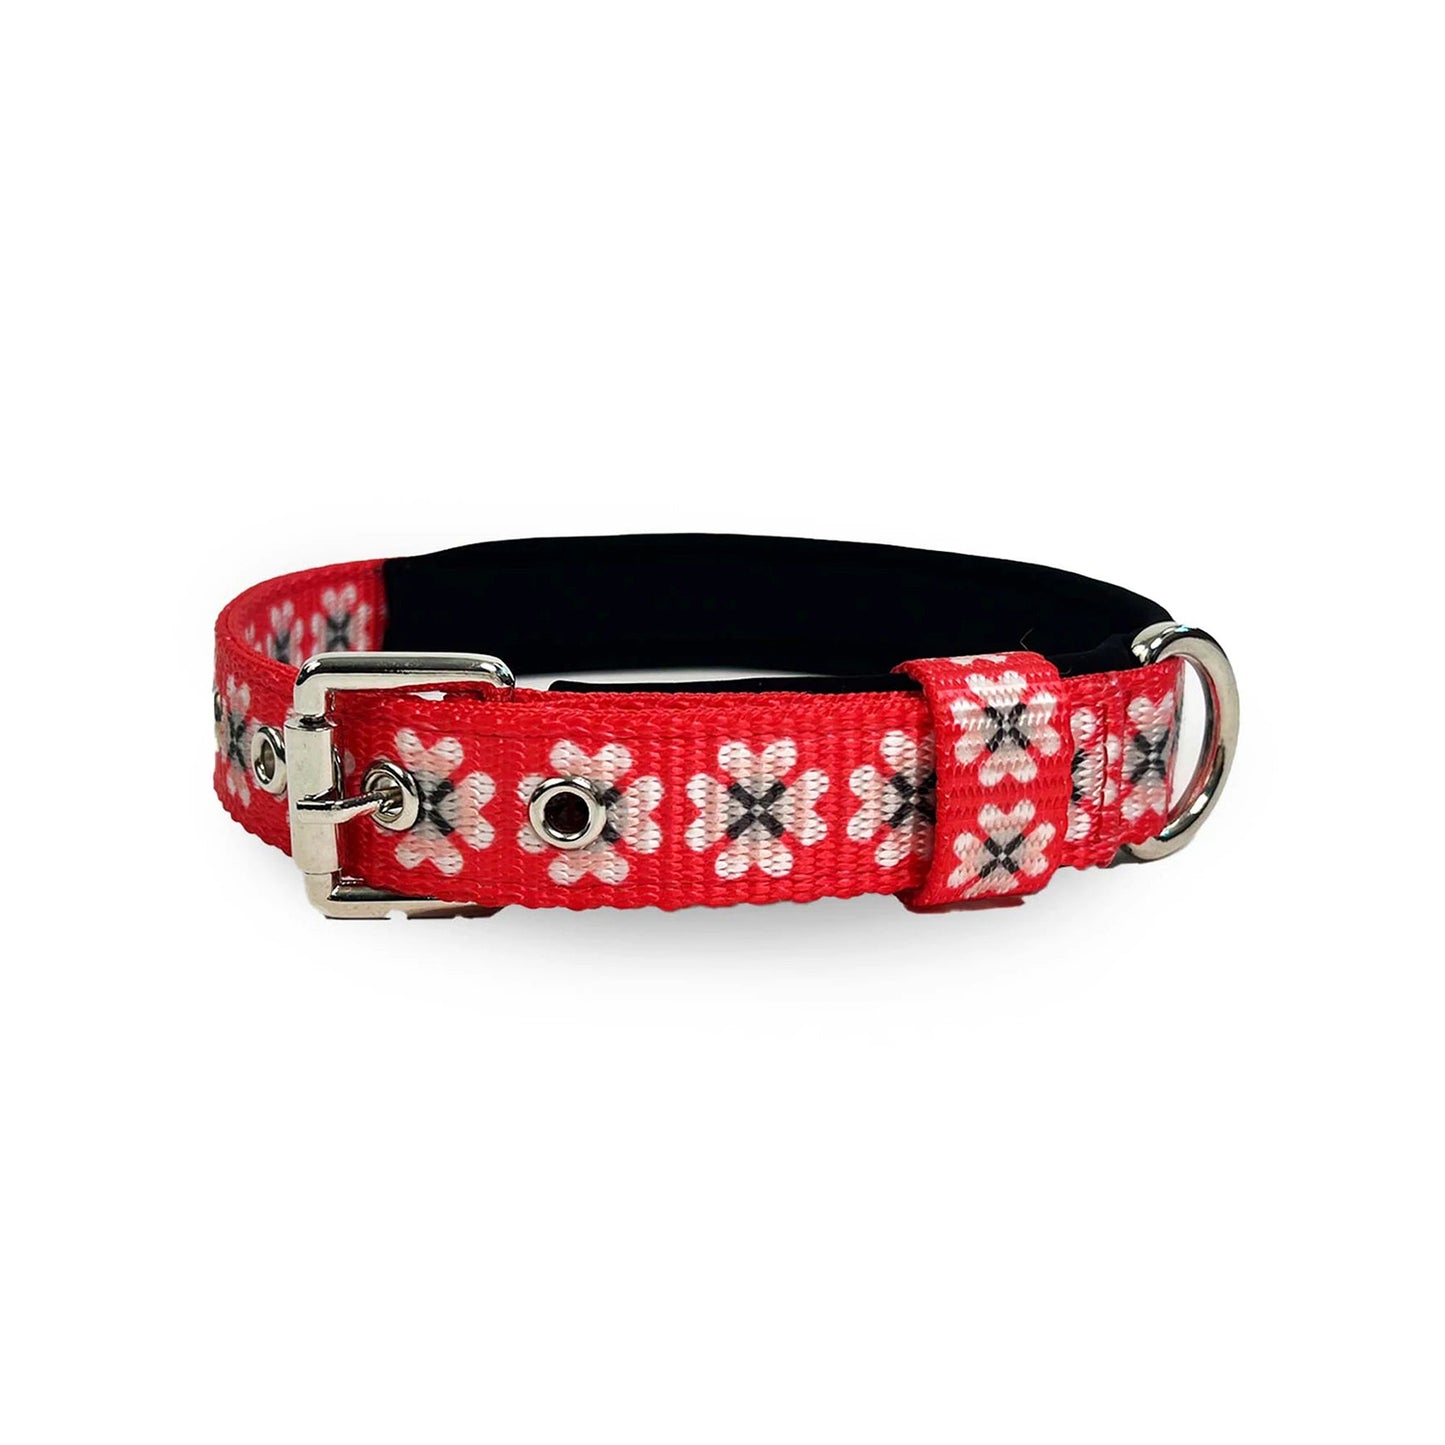 Forfurs - Instalove Pin Buckle Collar with leashes For Dogs & Cats